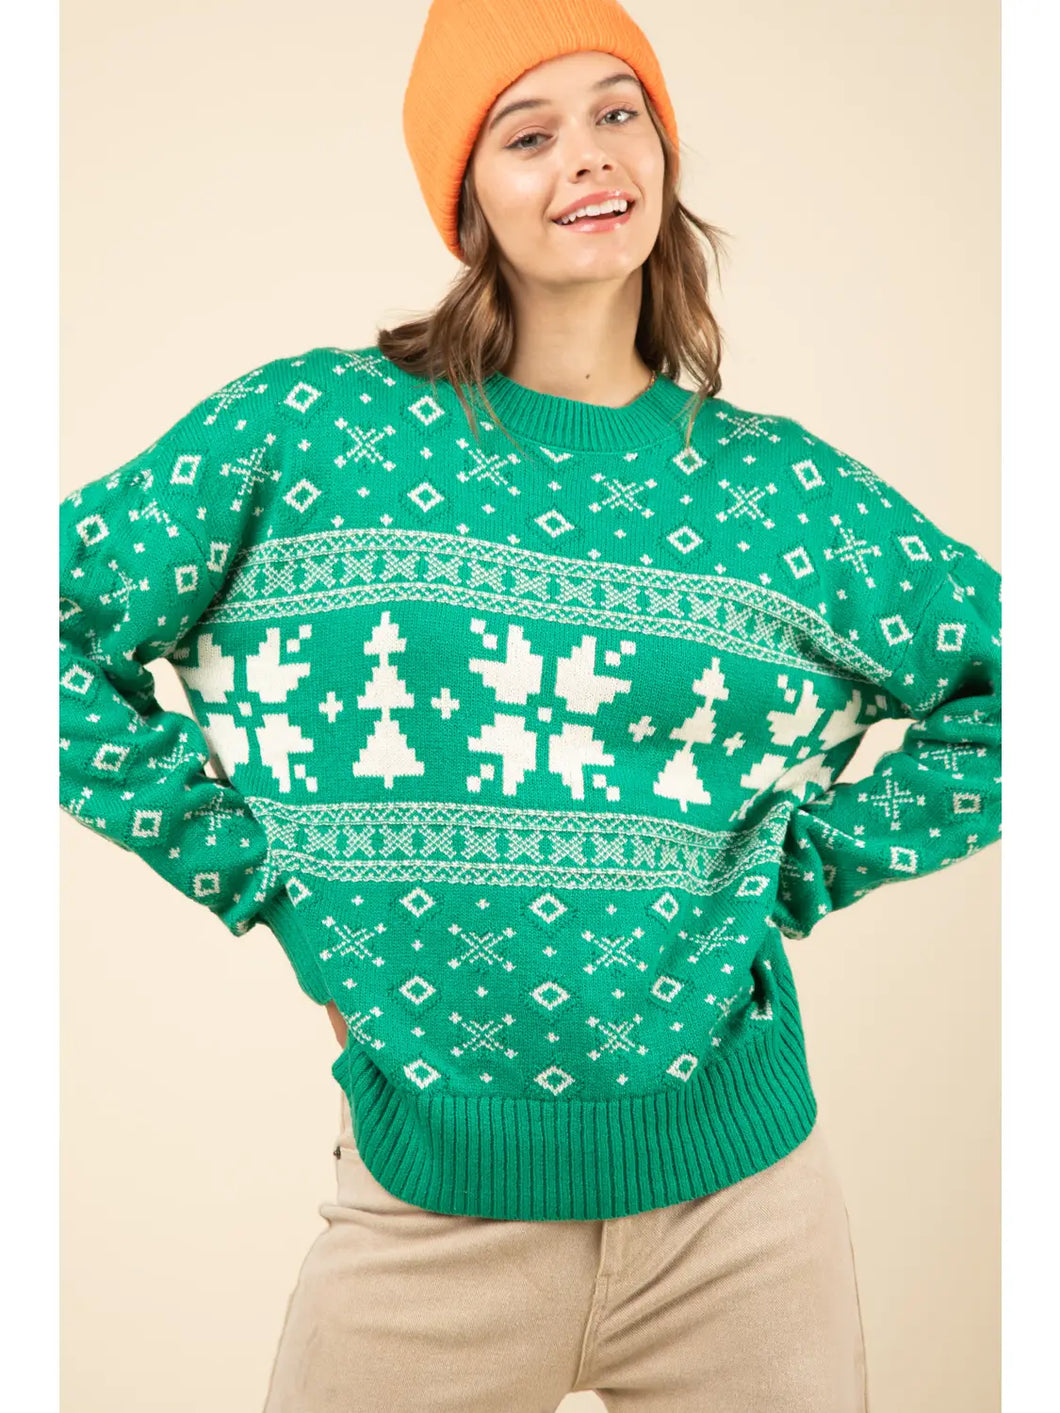 Green Holiday Sweater - Athena's Fashion Boutique